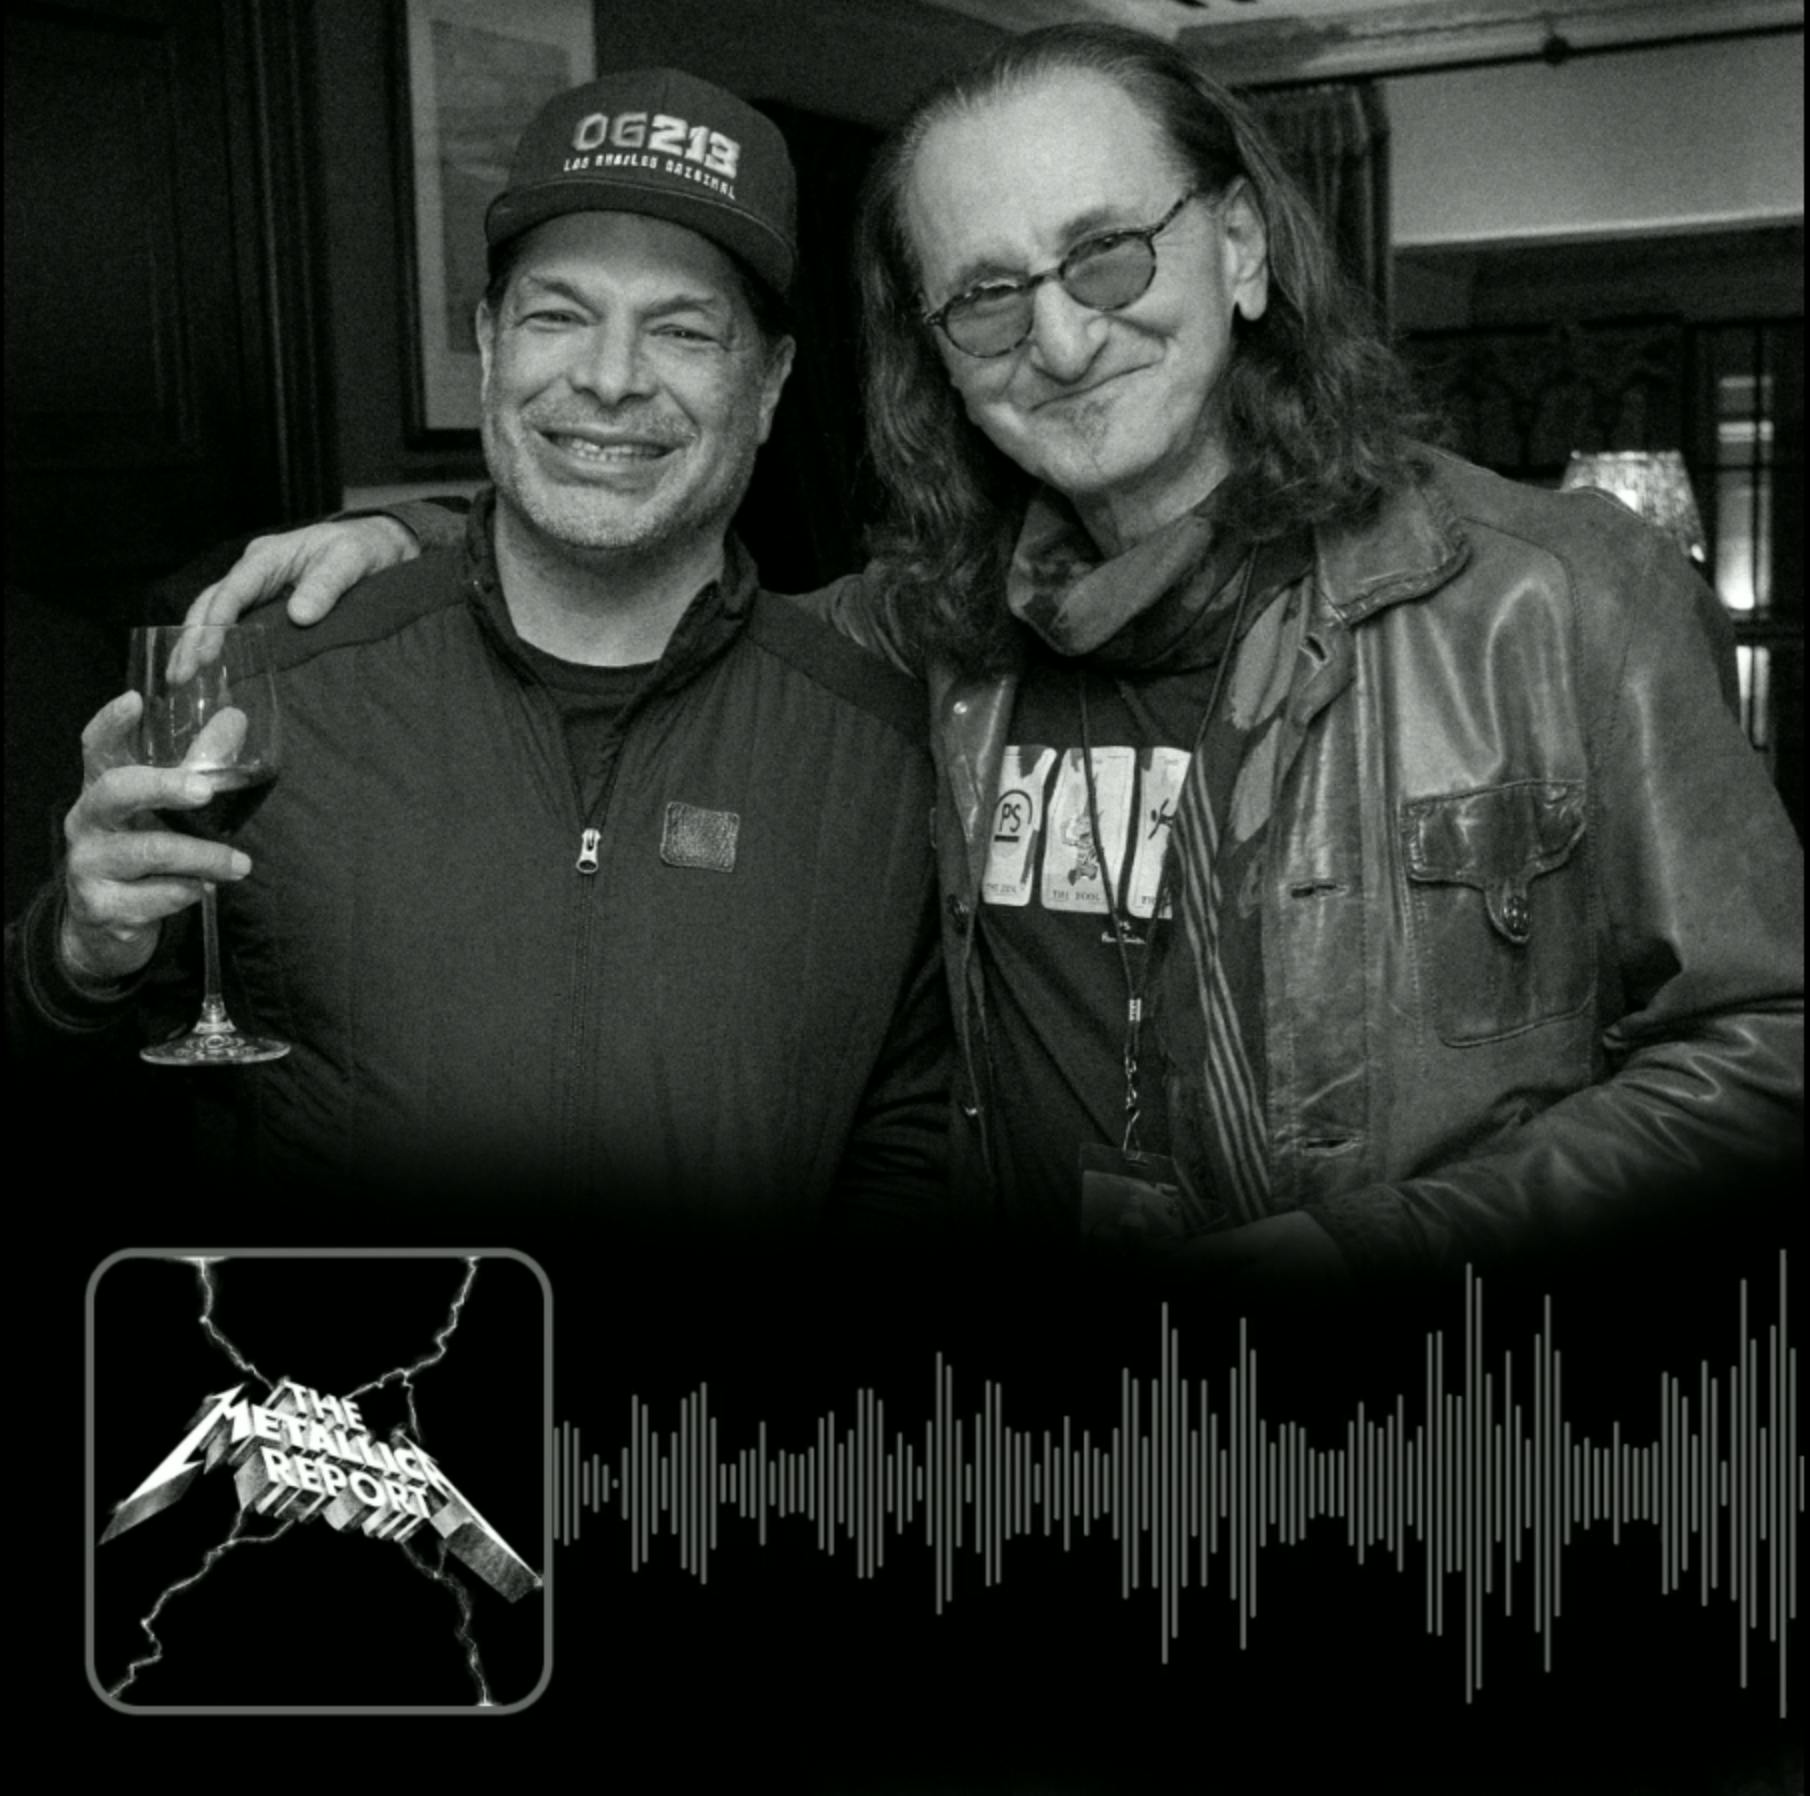 Episode 20: Rob hangs with Geddy Lee; Christian Carichner, Iowa State University Marching Band Director